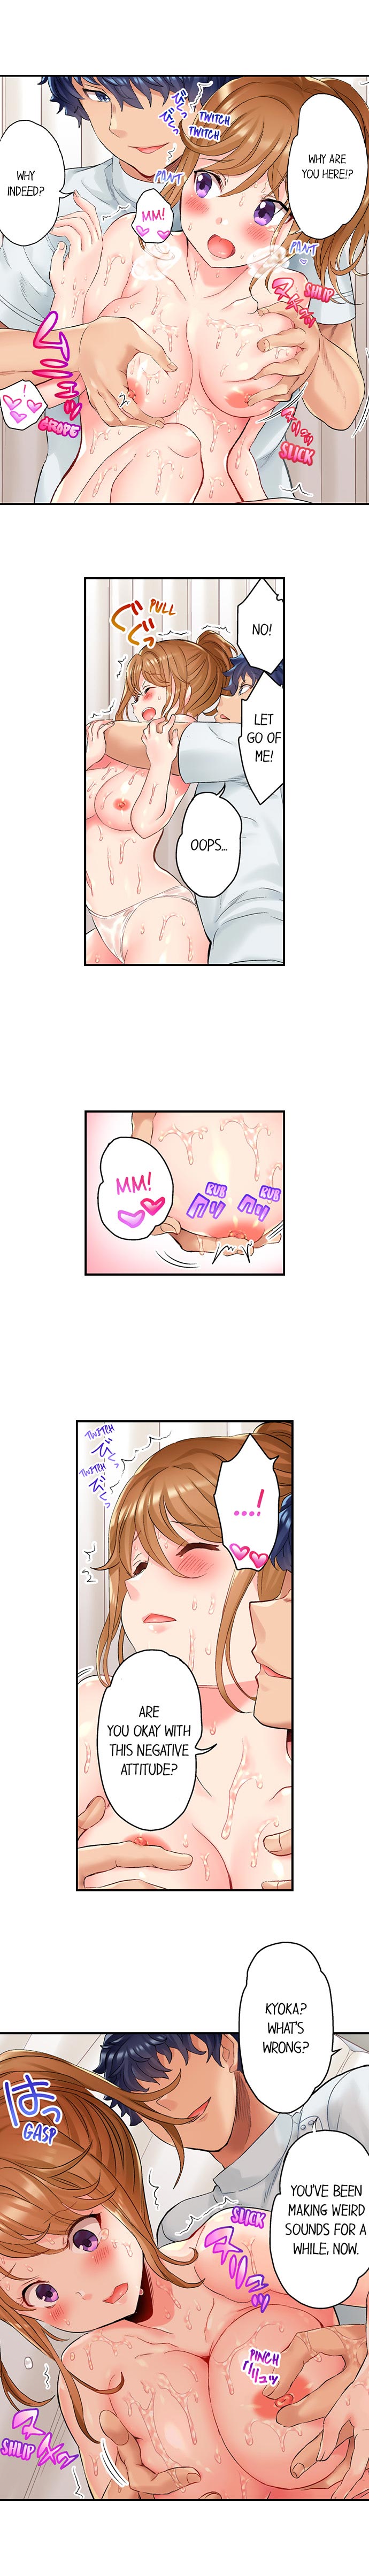 NTR Massage Chapter 6 - Page 2